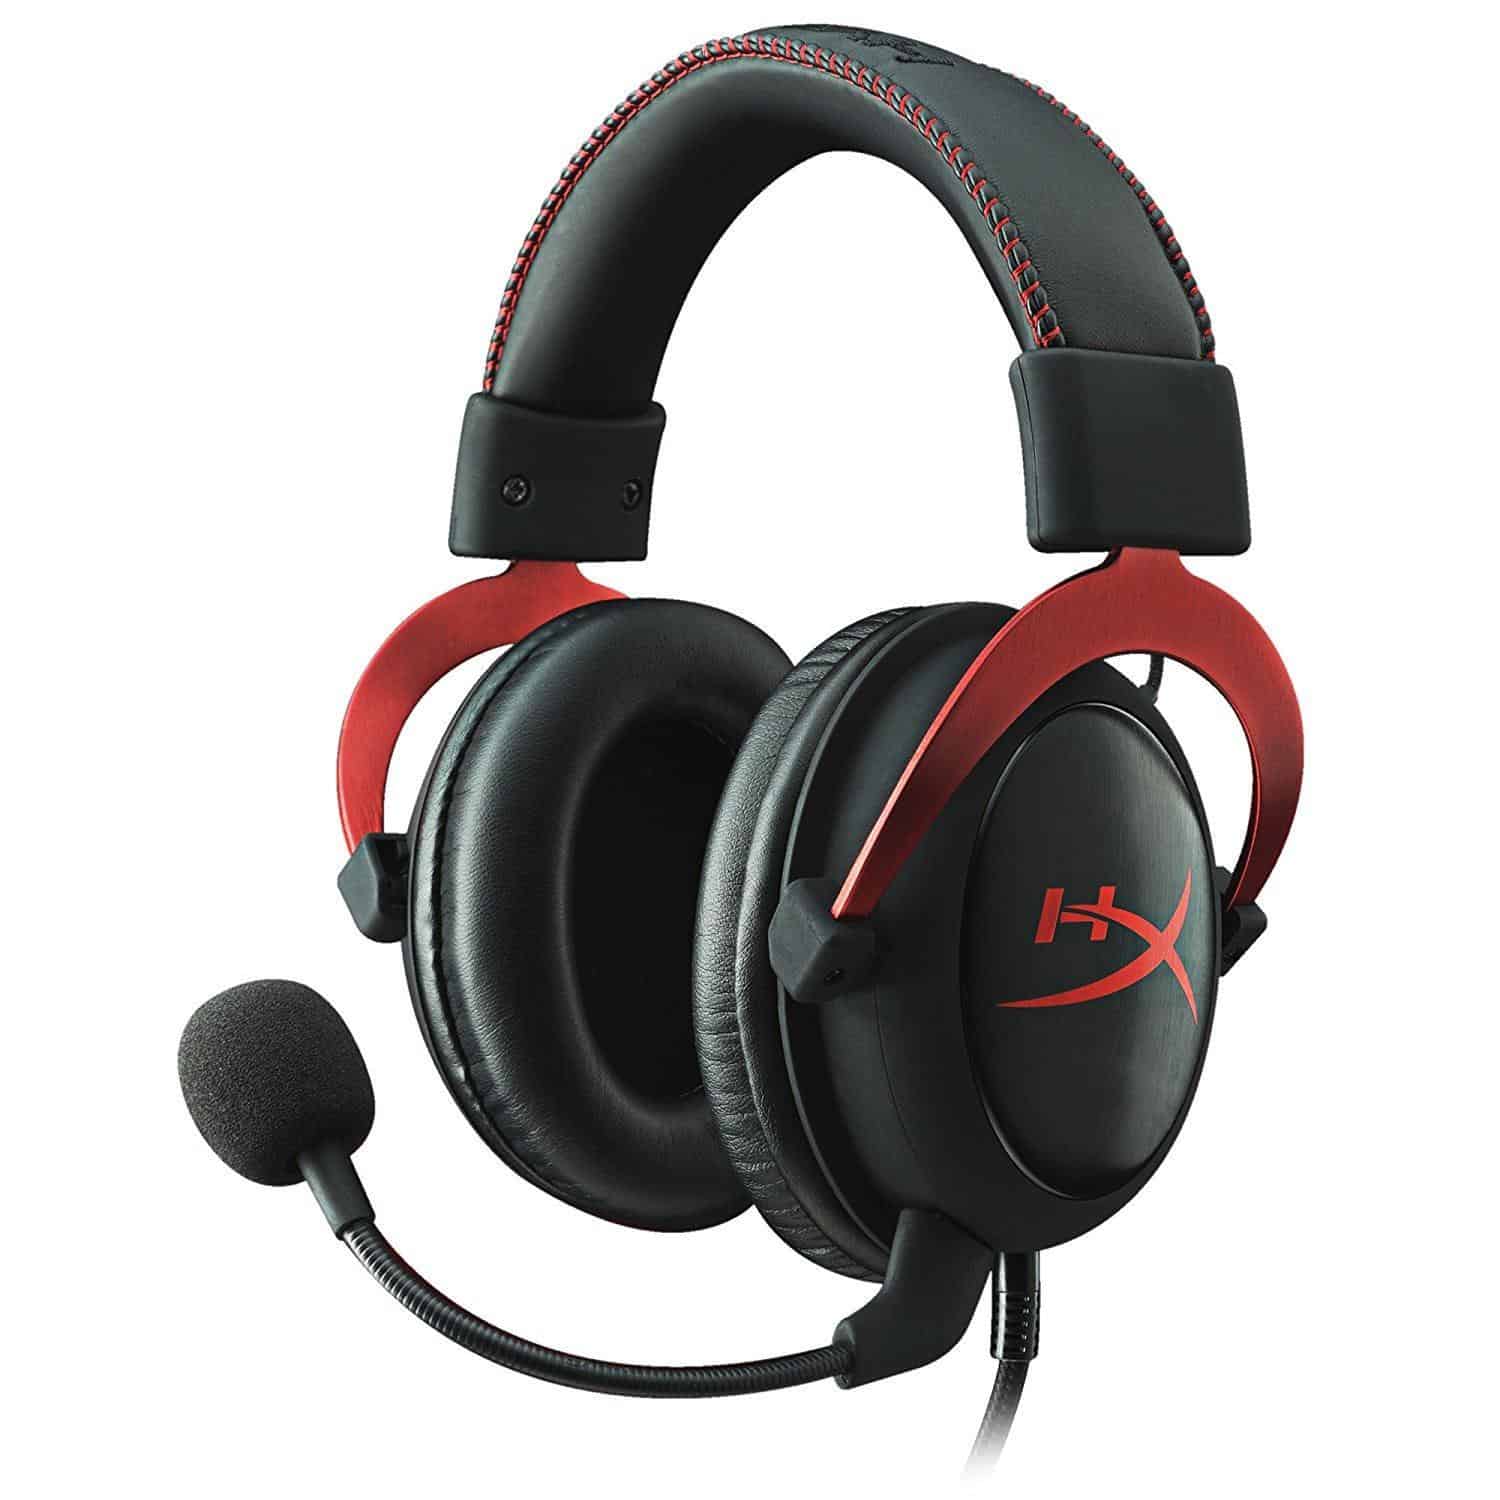 Which Gaming Headphones Do Pro Gamers Prefer? 1